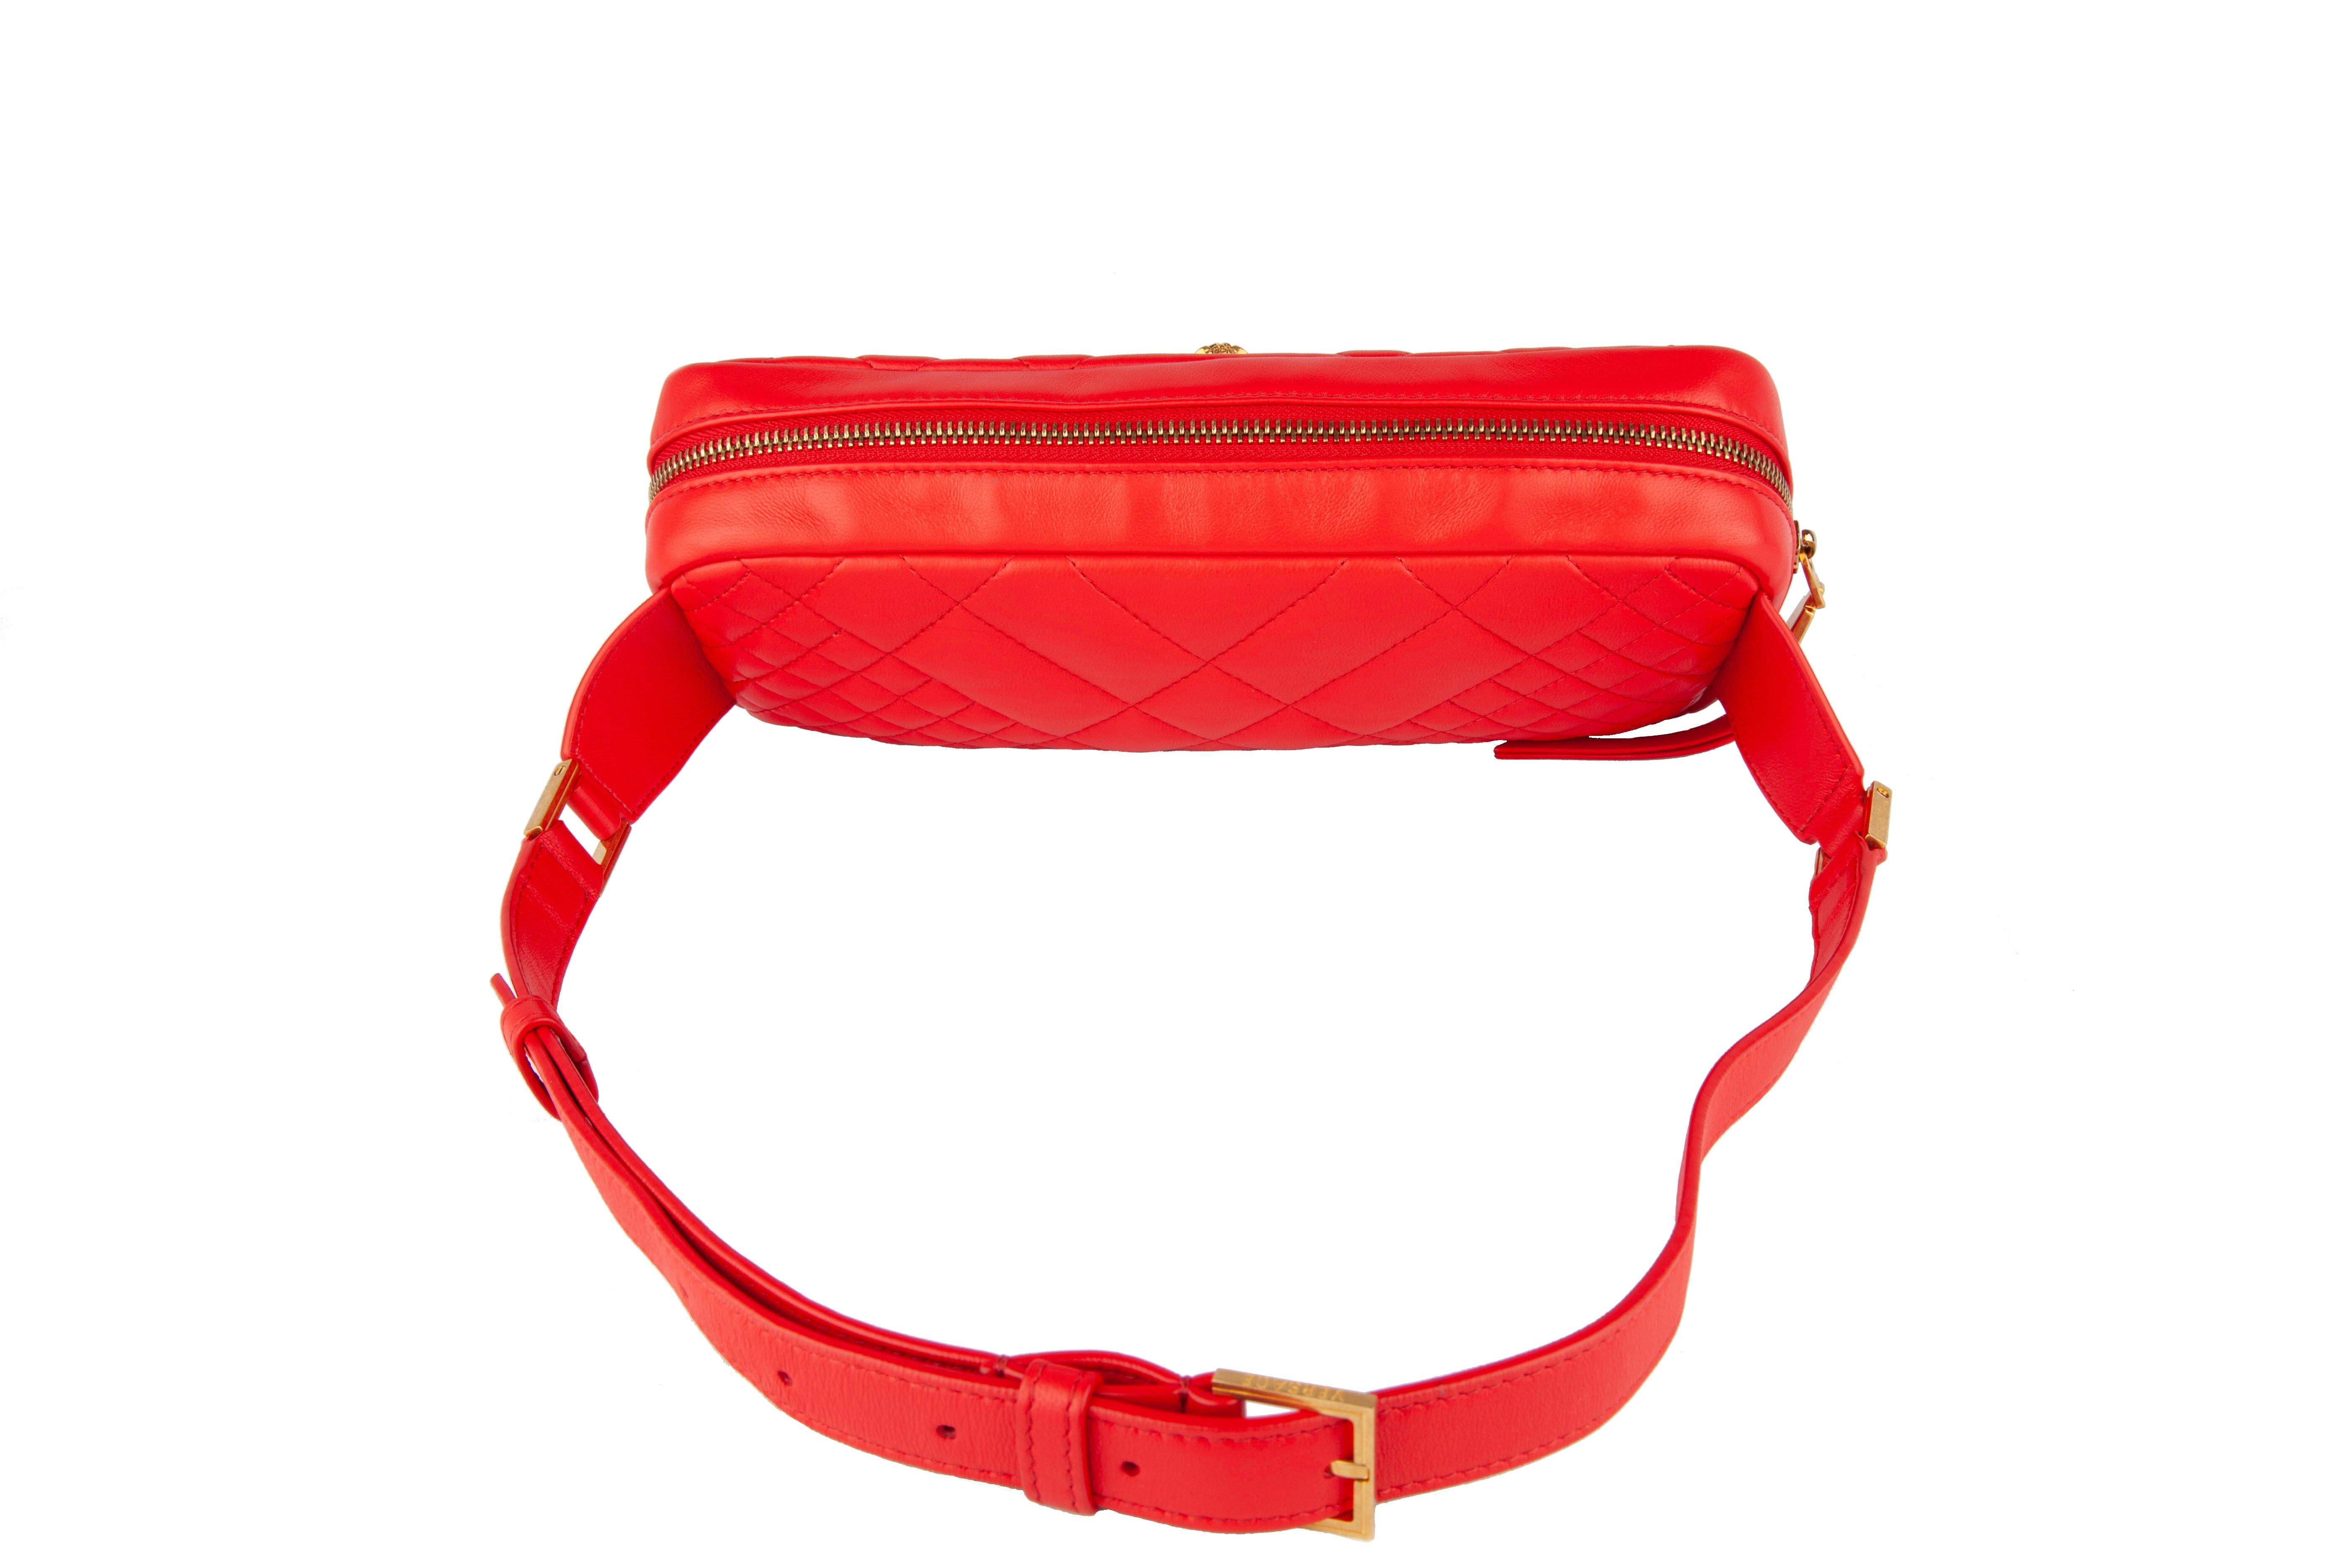 This red Versace Quilted Icon Belt Bag features signature gold medusa hardware, quilted calf leather, top zip closure, and an adjustable belt strap. Brand new. Made in Italy.

Approx. Dimensions: 11